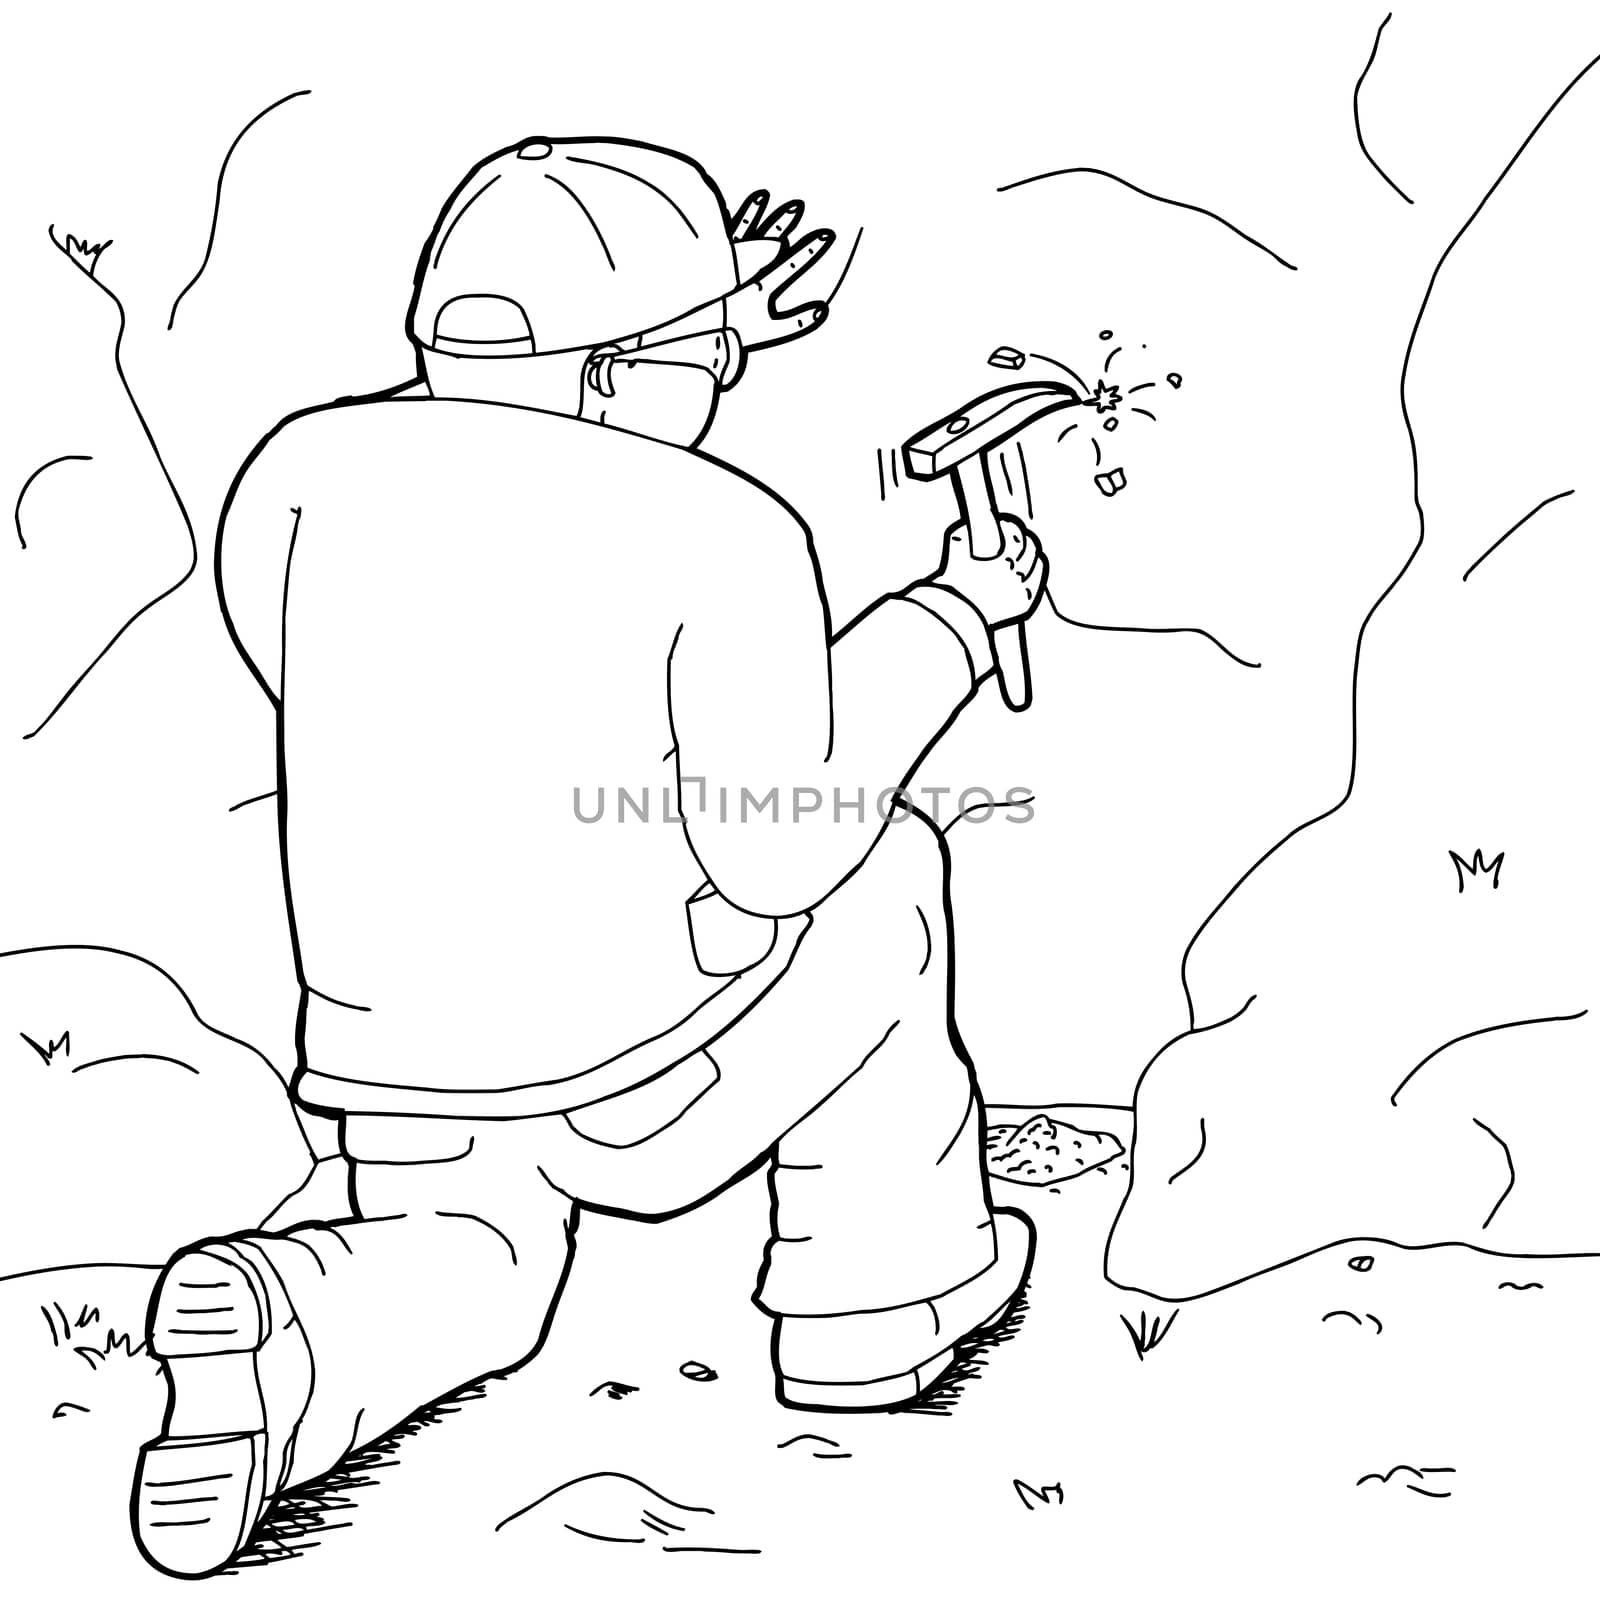 Outline of Geologists Collecting Specimen by TheBlackRhino